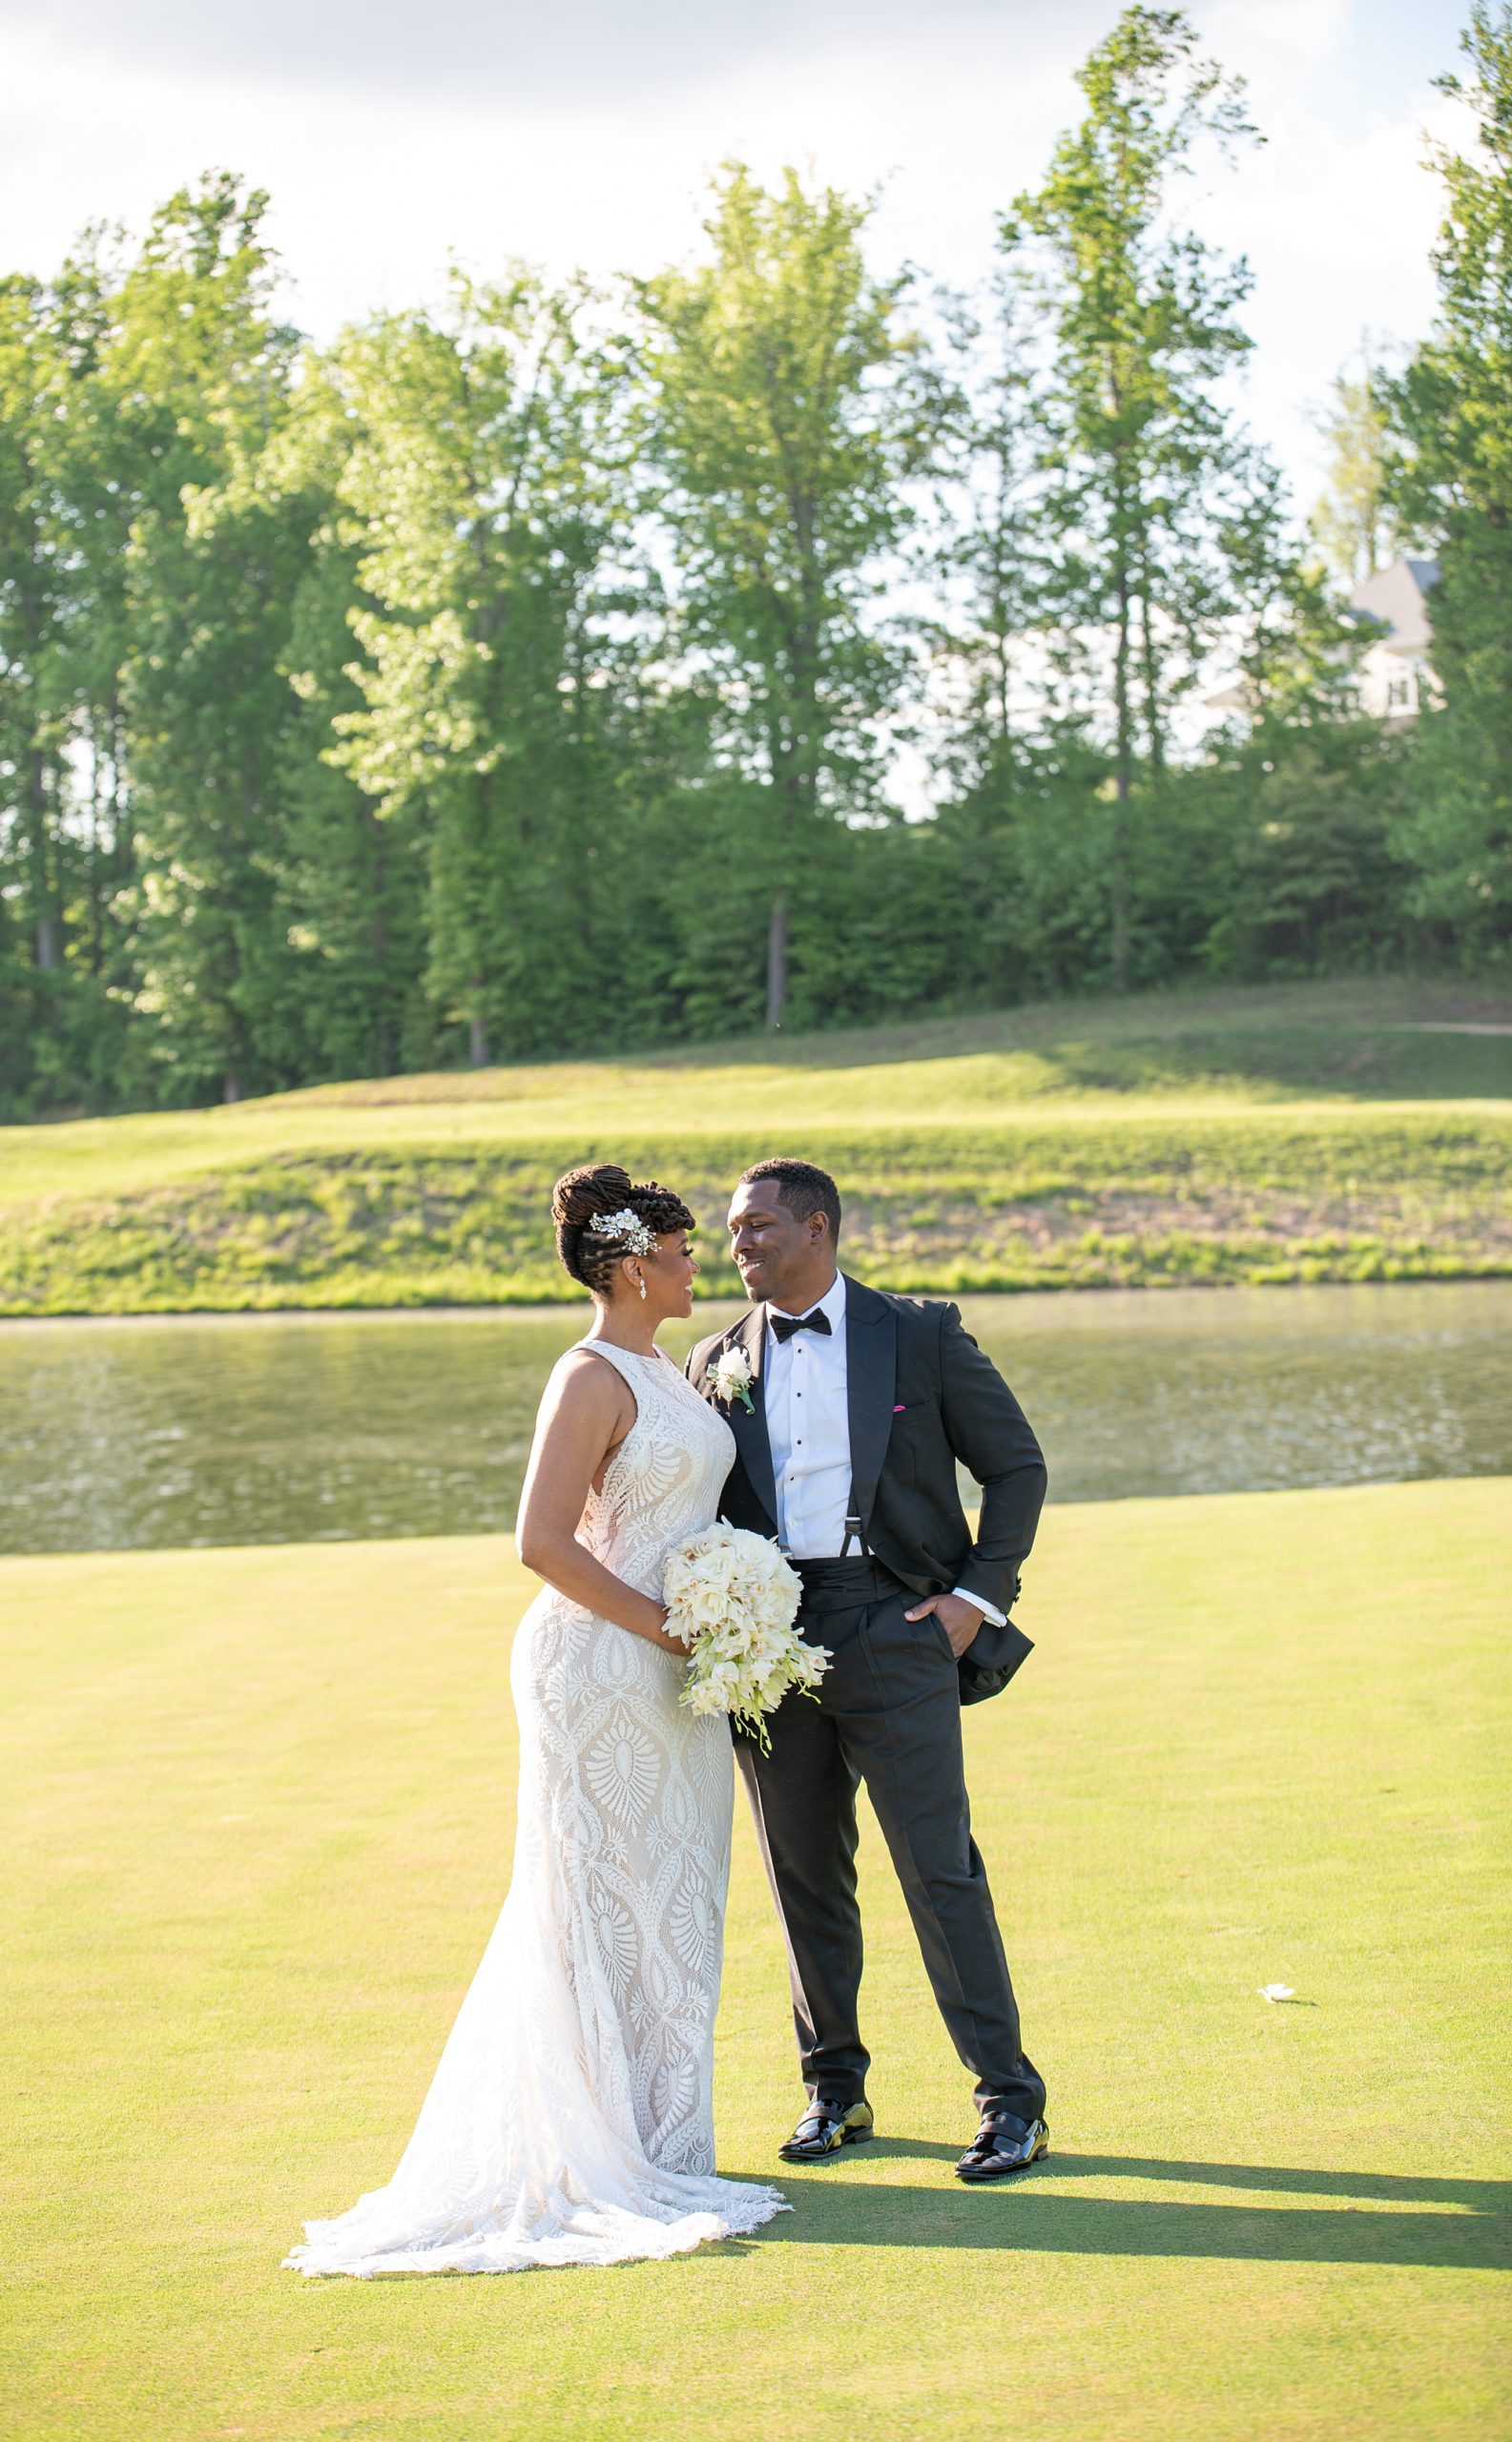 groom looks at bride standing on golf course green